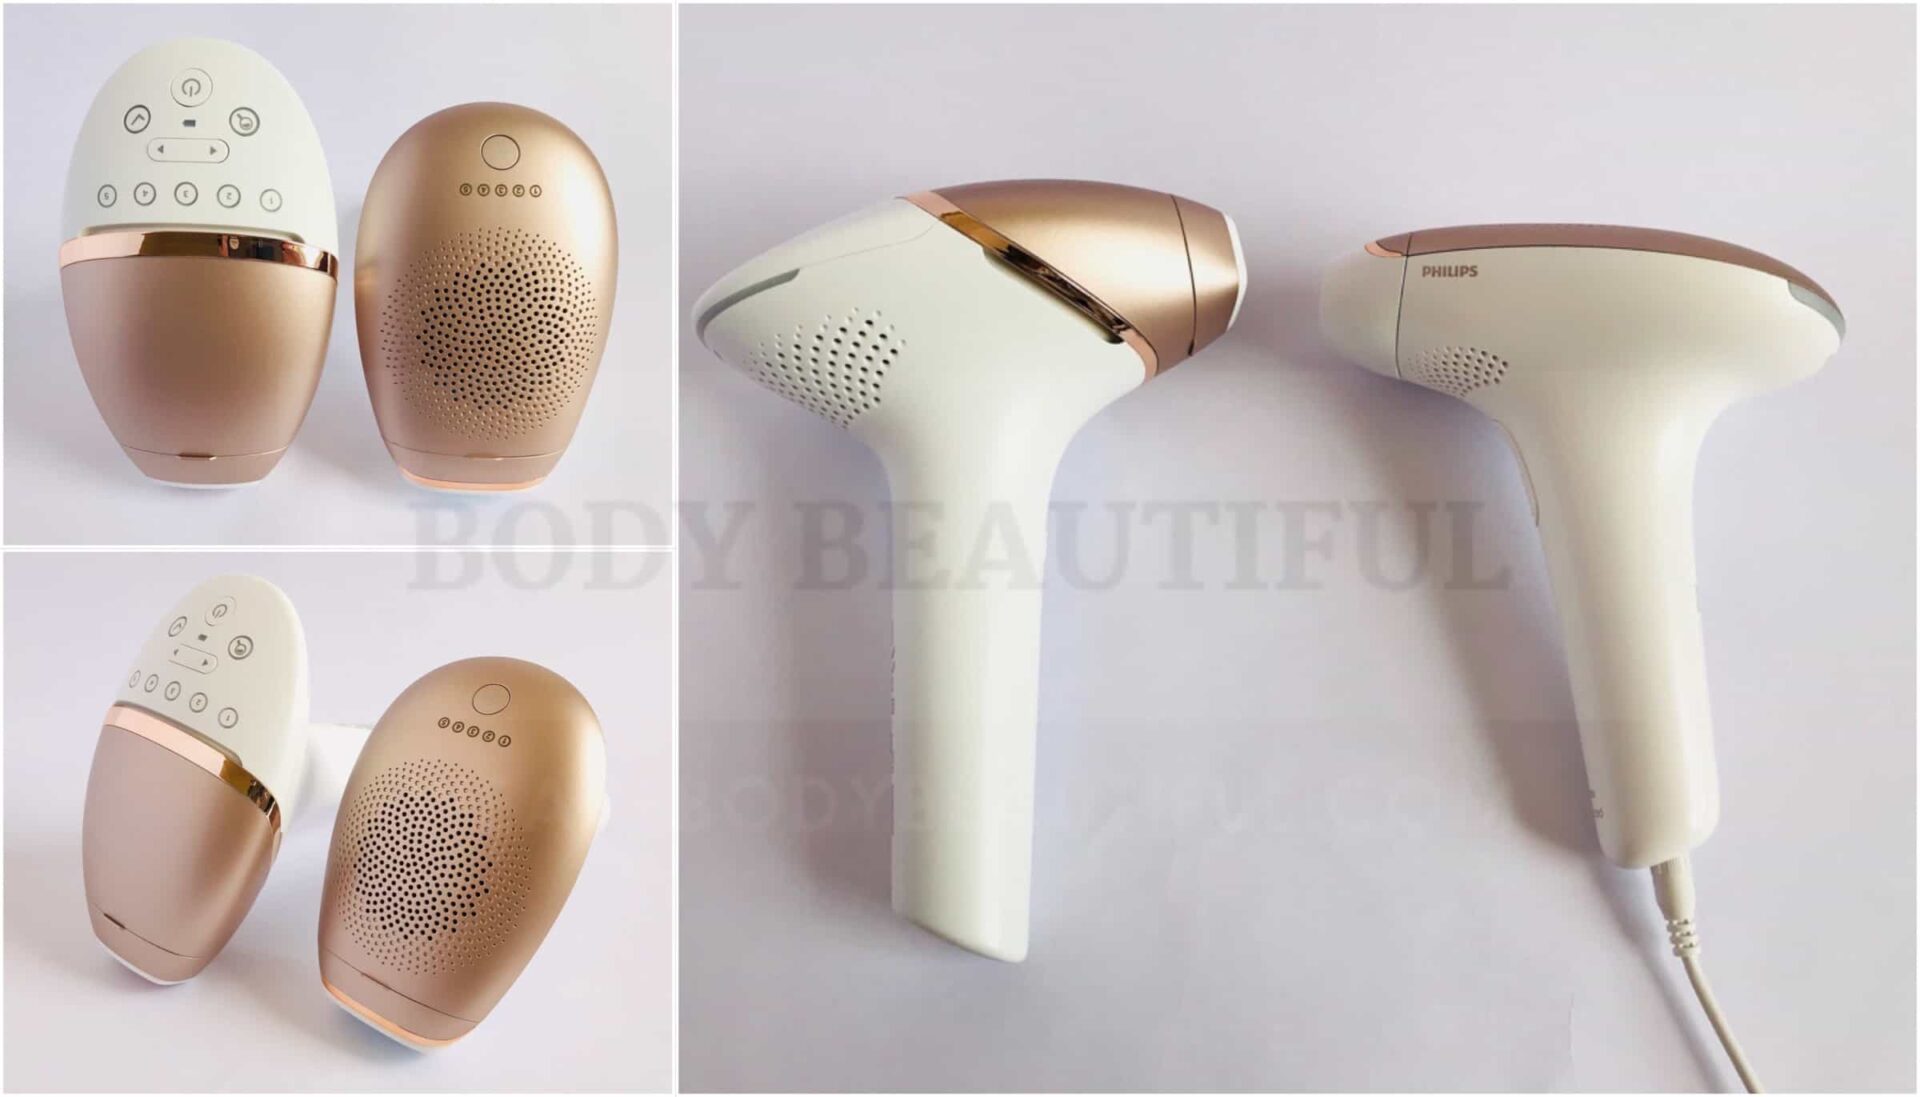 Philips Lumea PRestige vs Advanced: tried and tested comparison review by WeAreBodyBeautiful experts